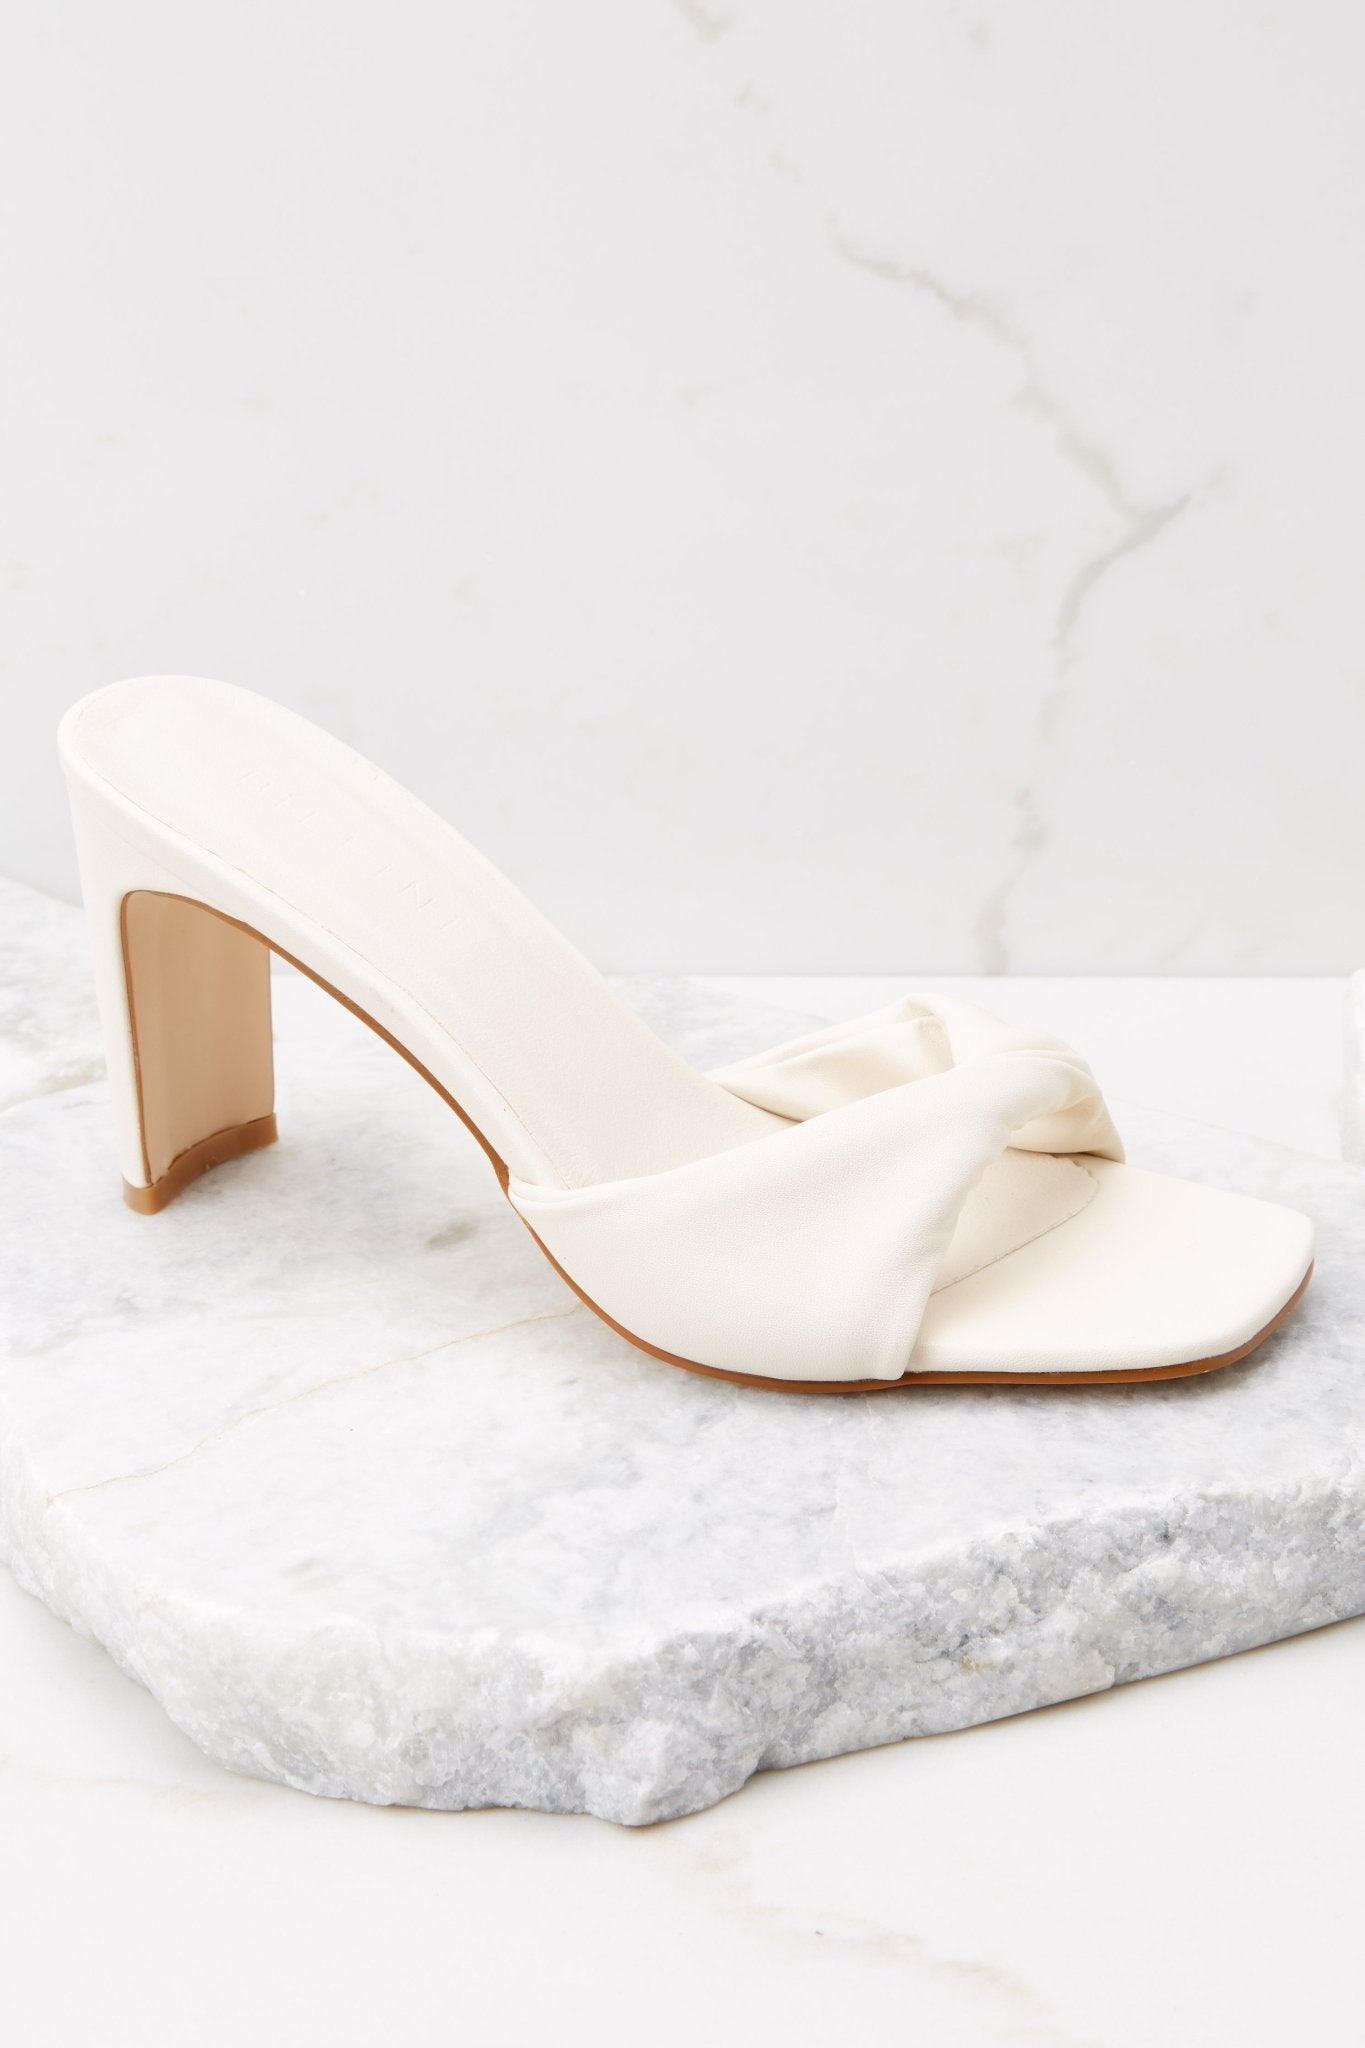 Outer-side view of  these heels that feature a square toe, a twisted strap across the top of the foot, a thin straight heel, and a slip on design.